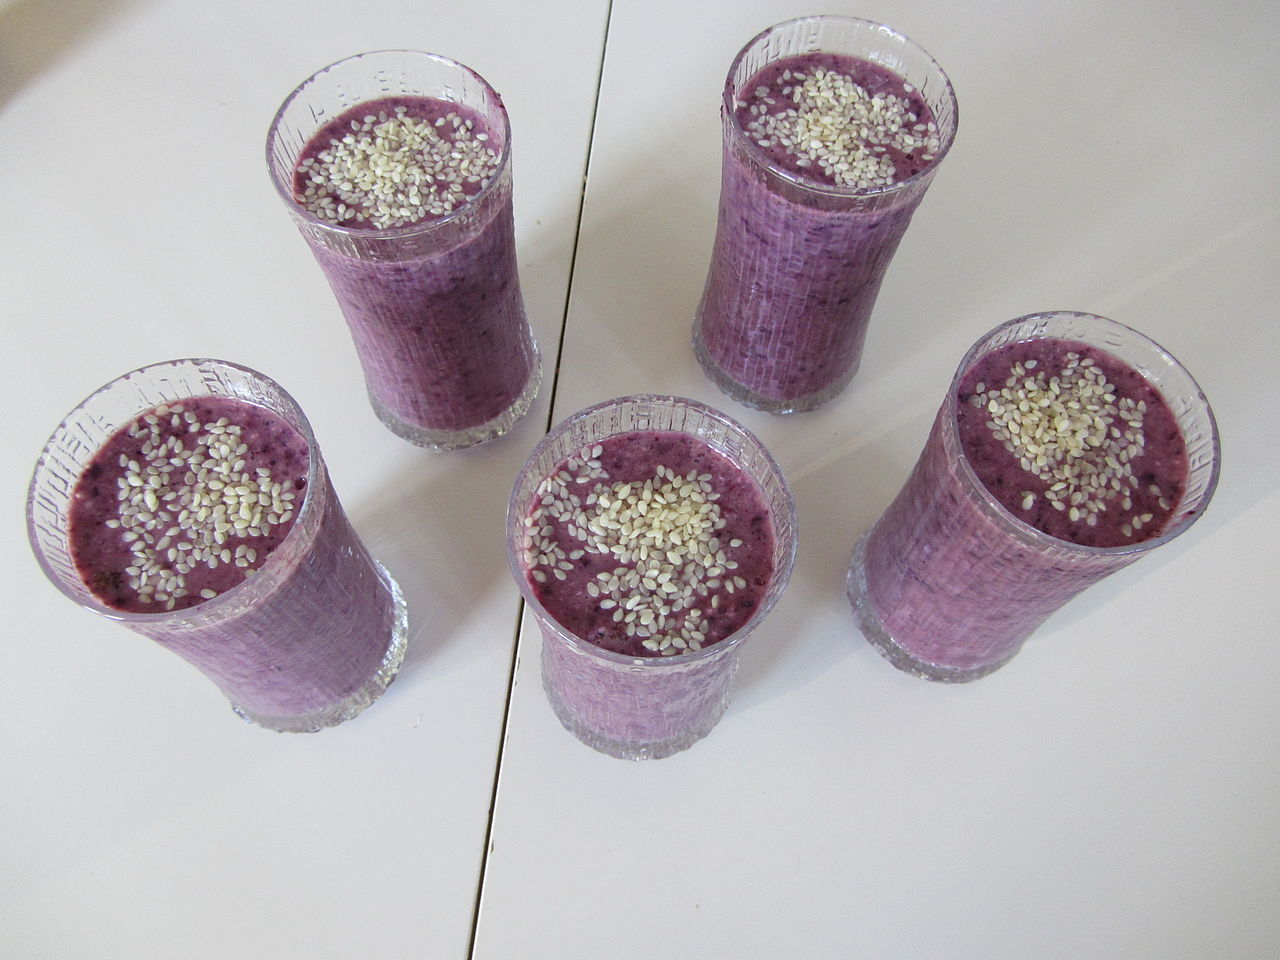 File:Smoothies C IMG  - Wikimedia Commons